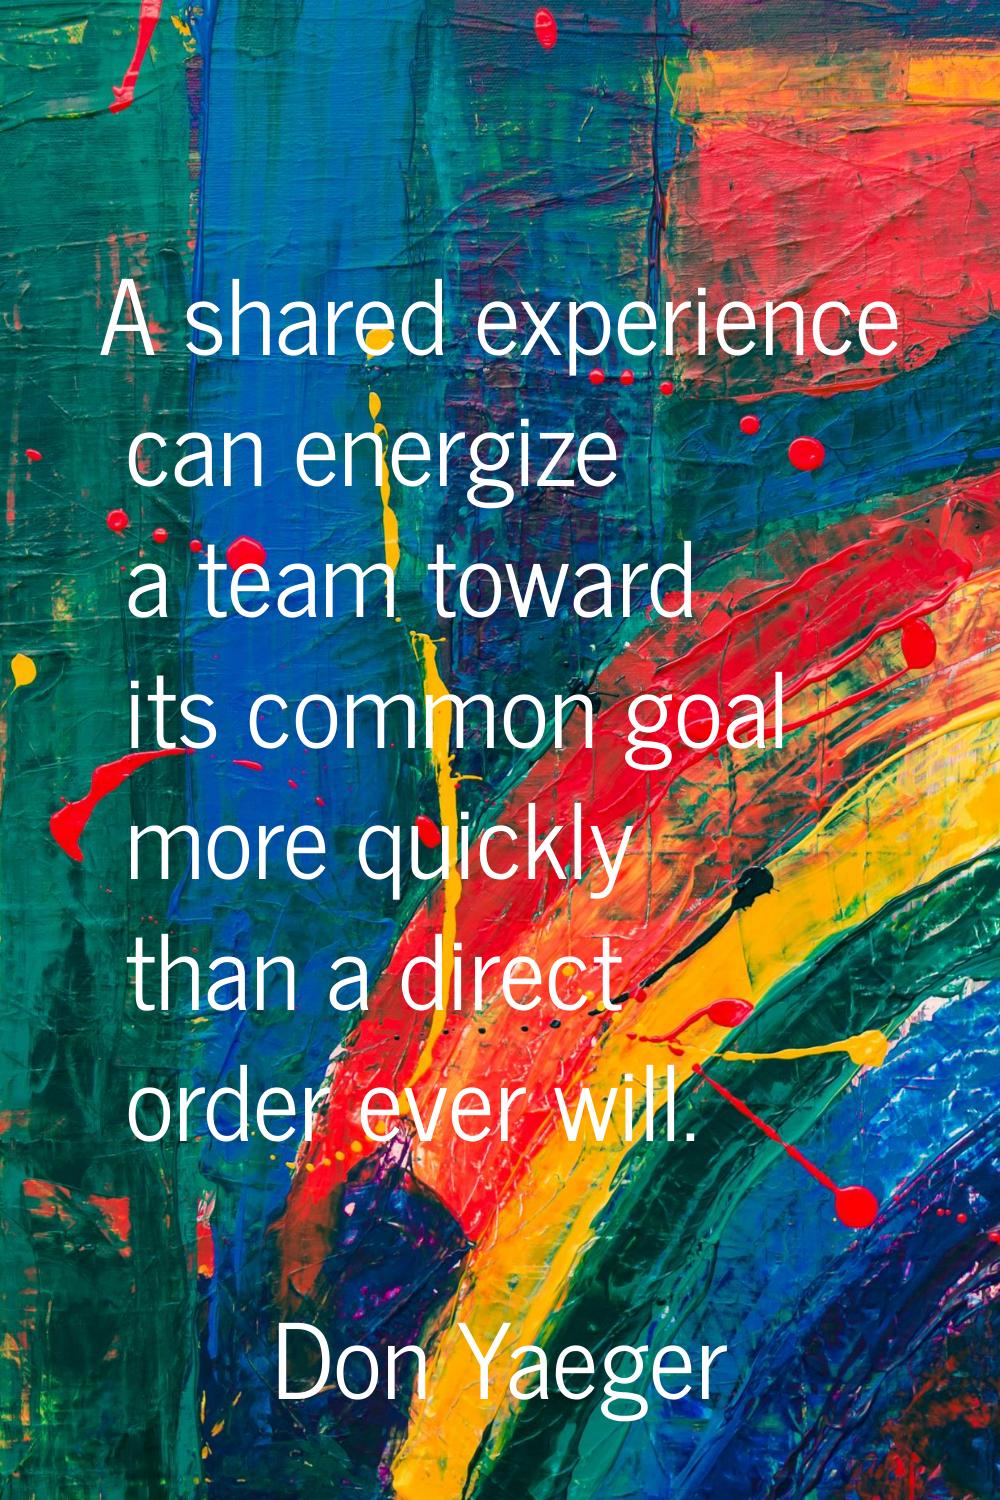 A shared experience can energize a team toward its common goal more quickly than a direct order eve